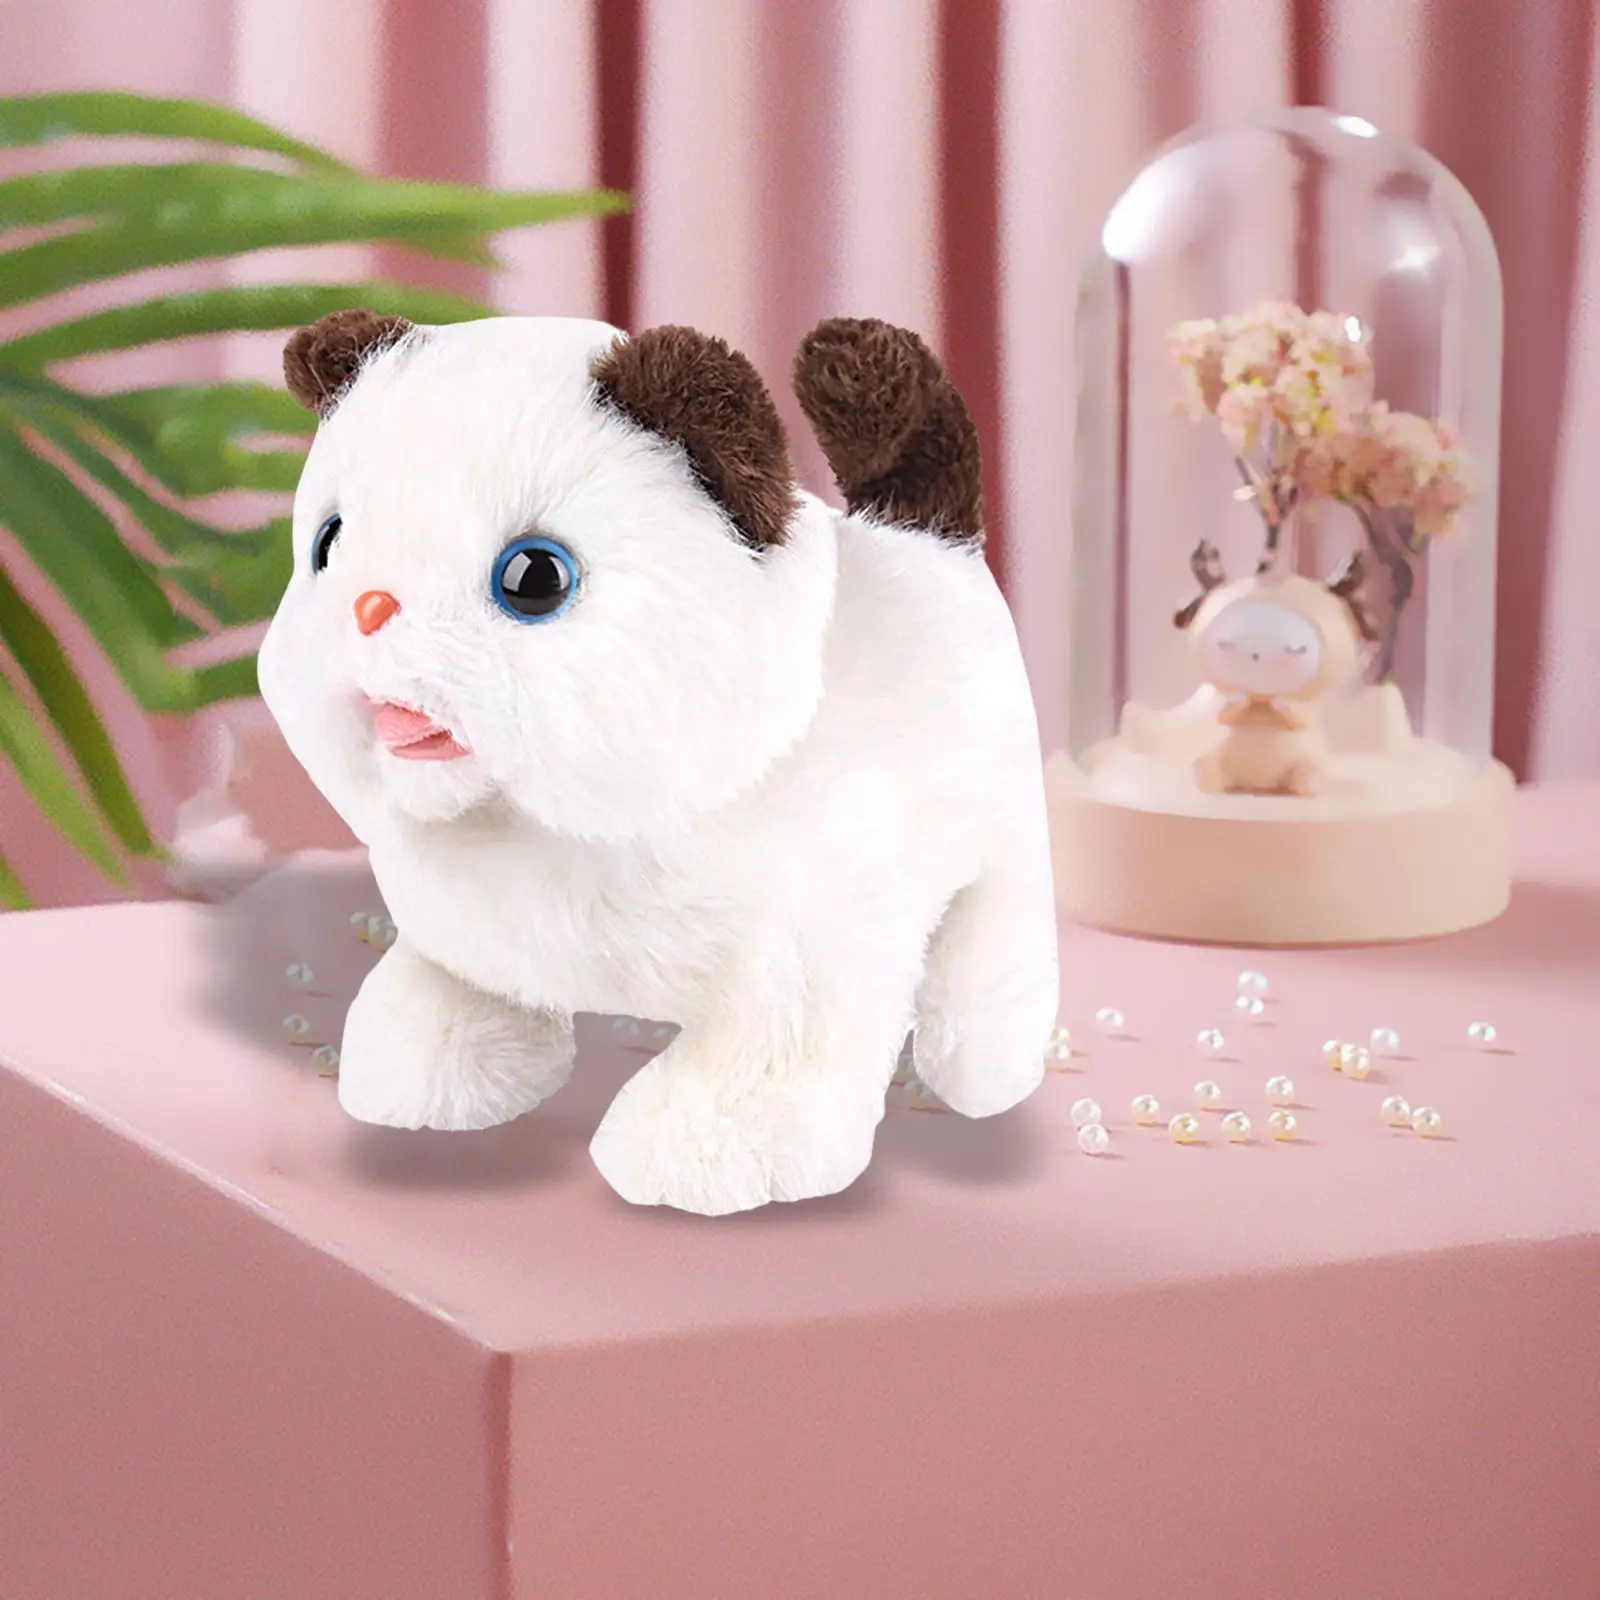 Cute Electric Cat Plush Toy Robotic Pet Toy Plush for Toddlers Boys Girls